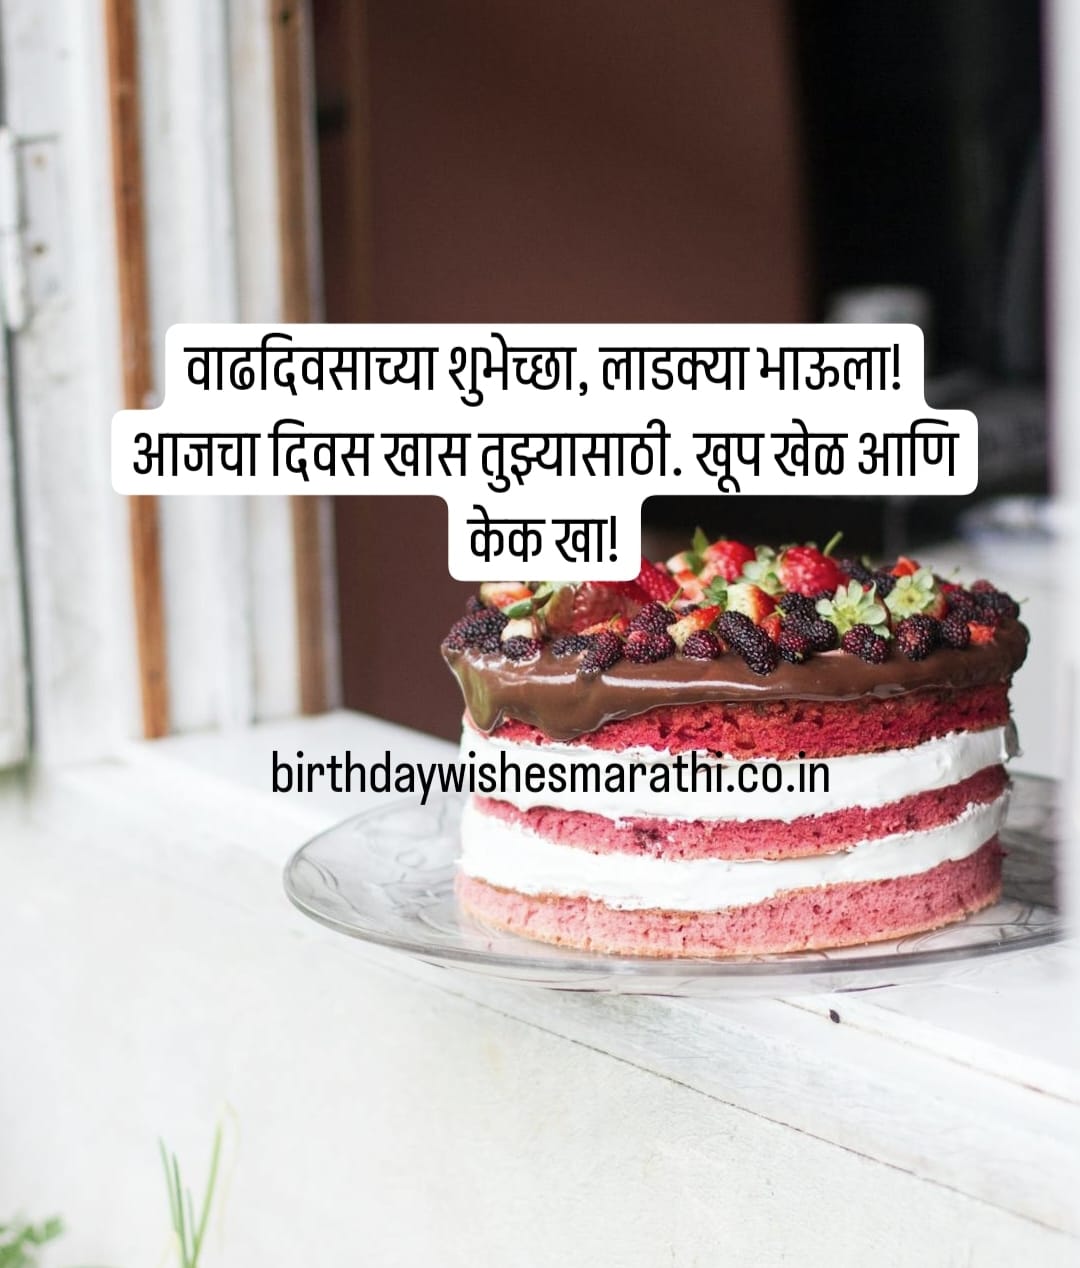 Birthday Wishes for Brother Marathi